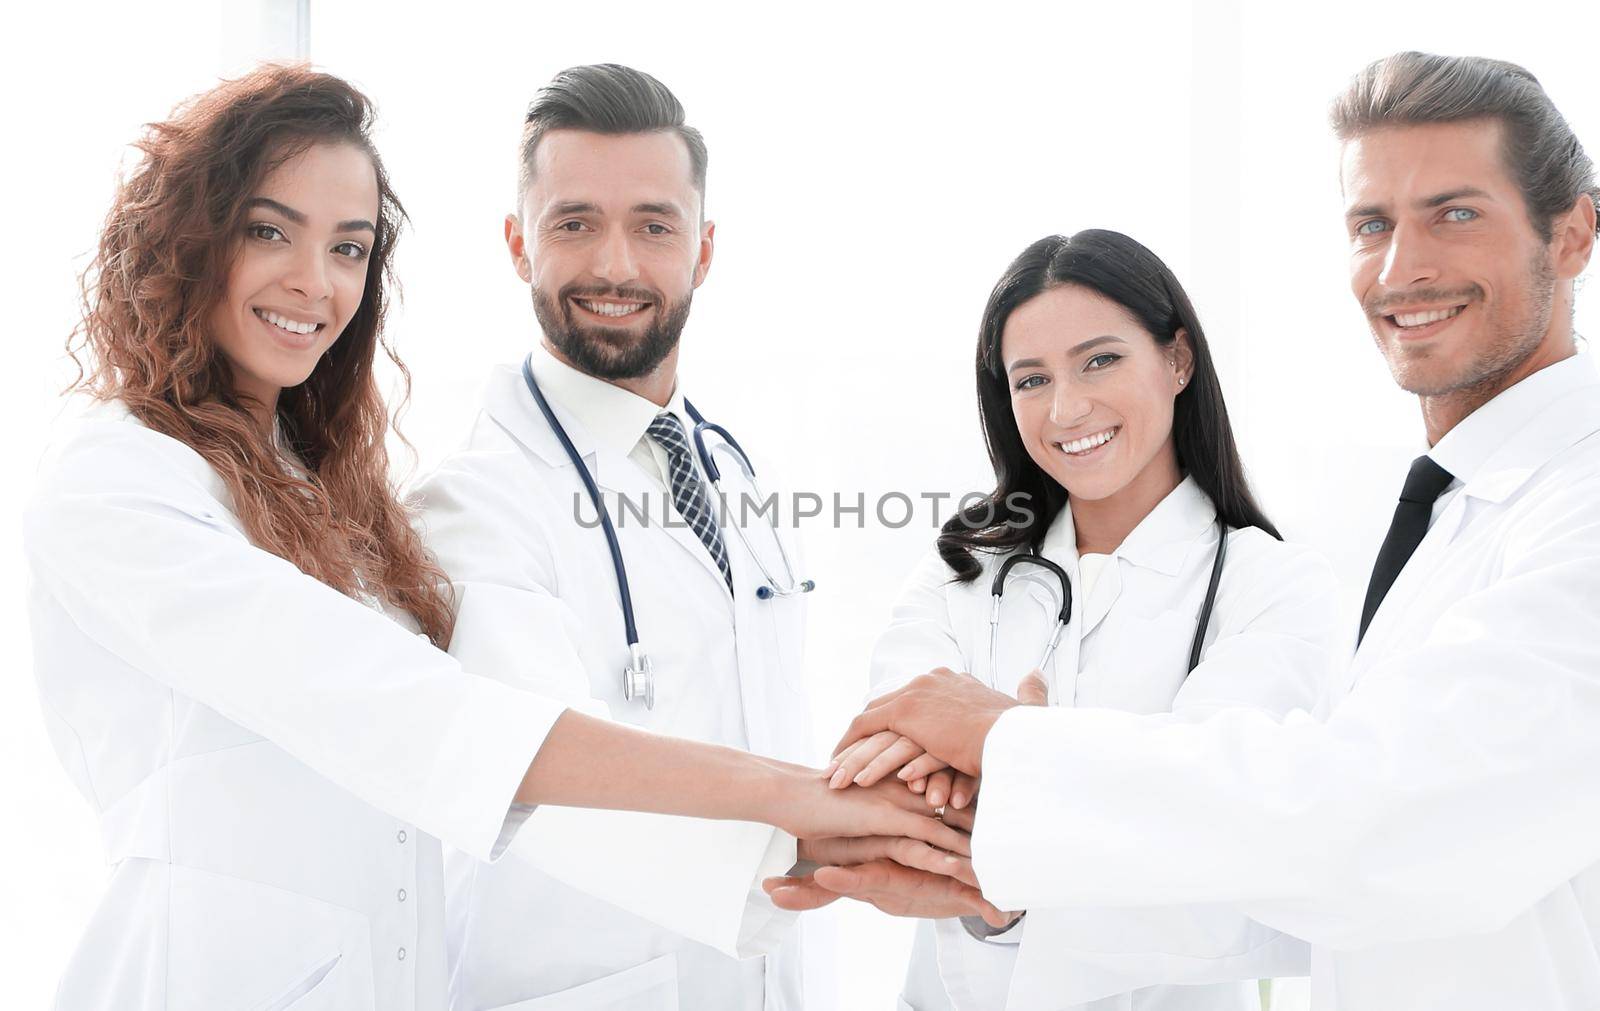 background image of a group of doctors by asdf